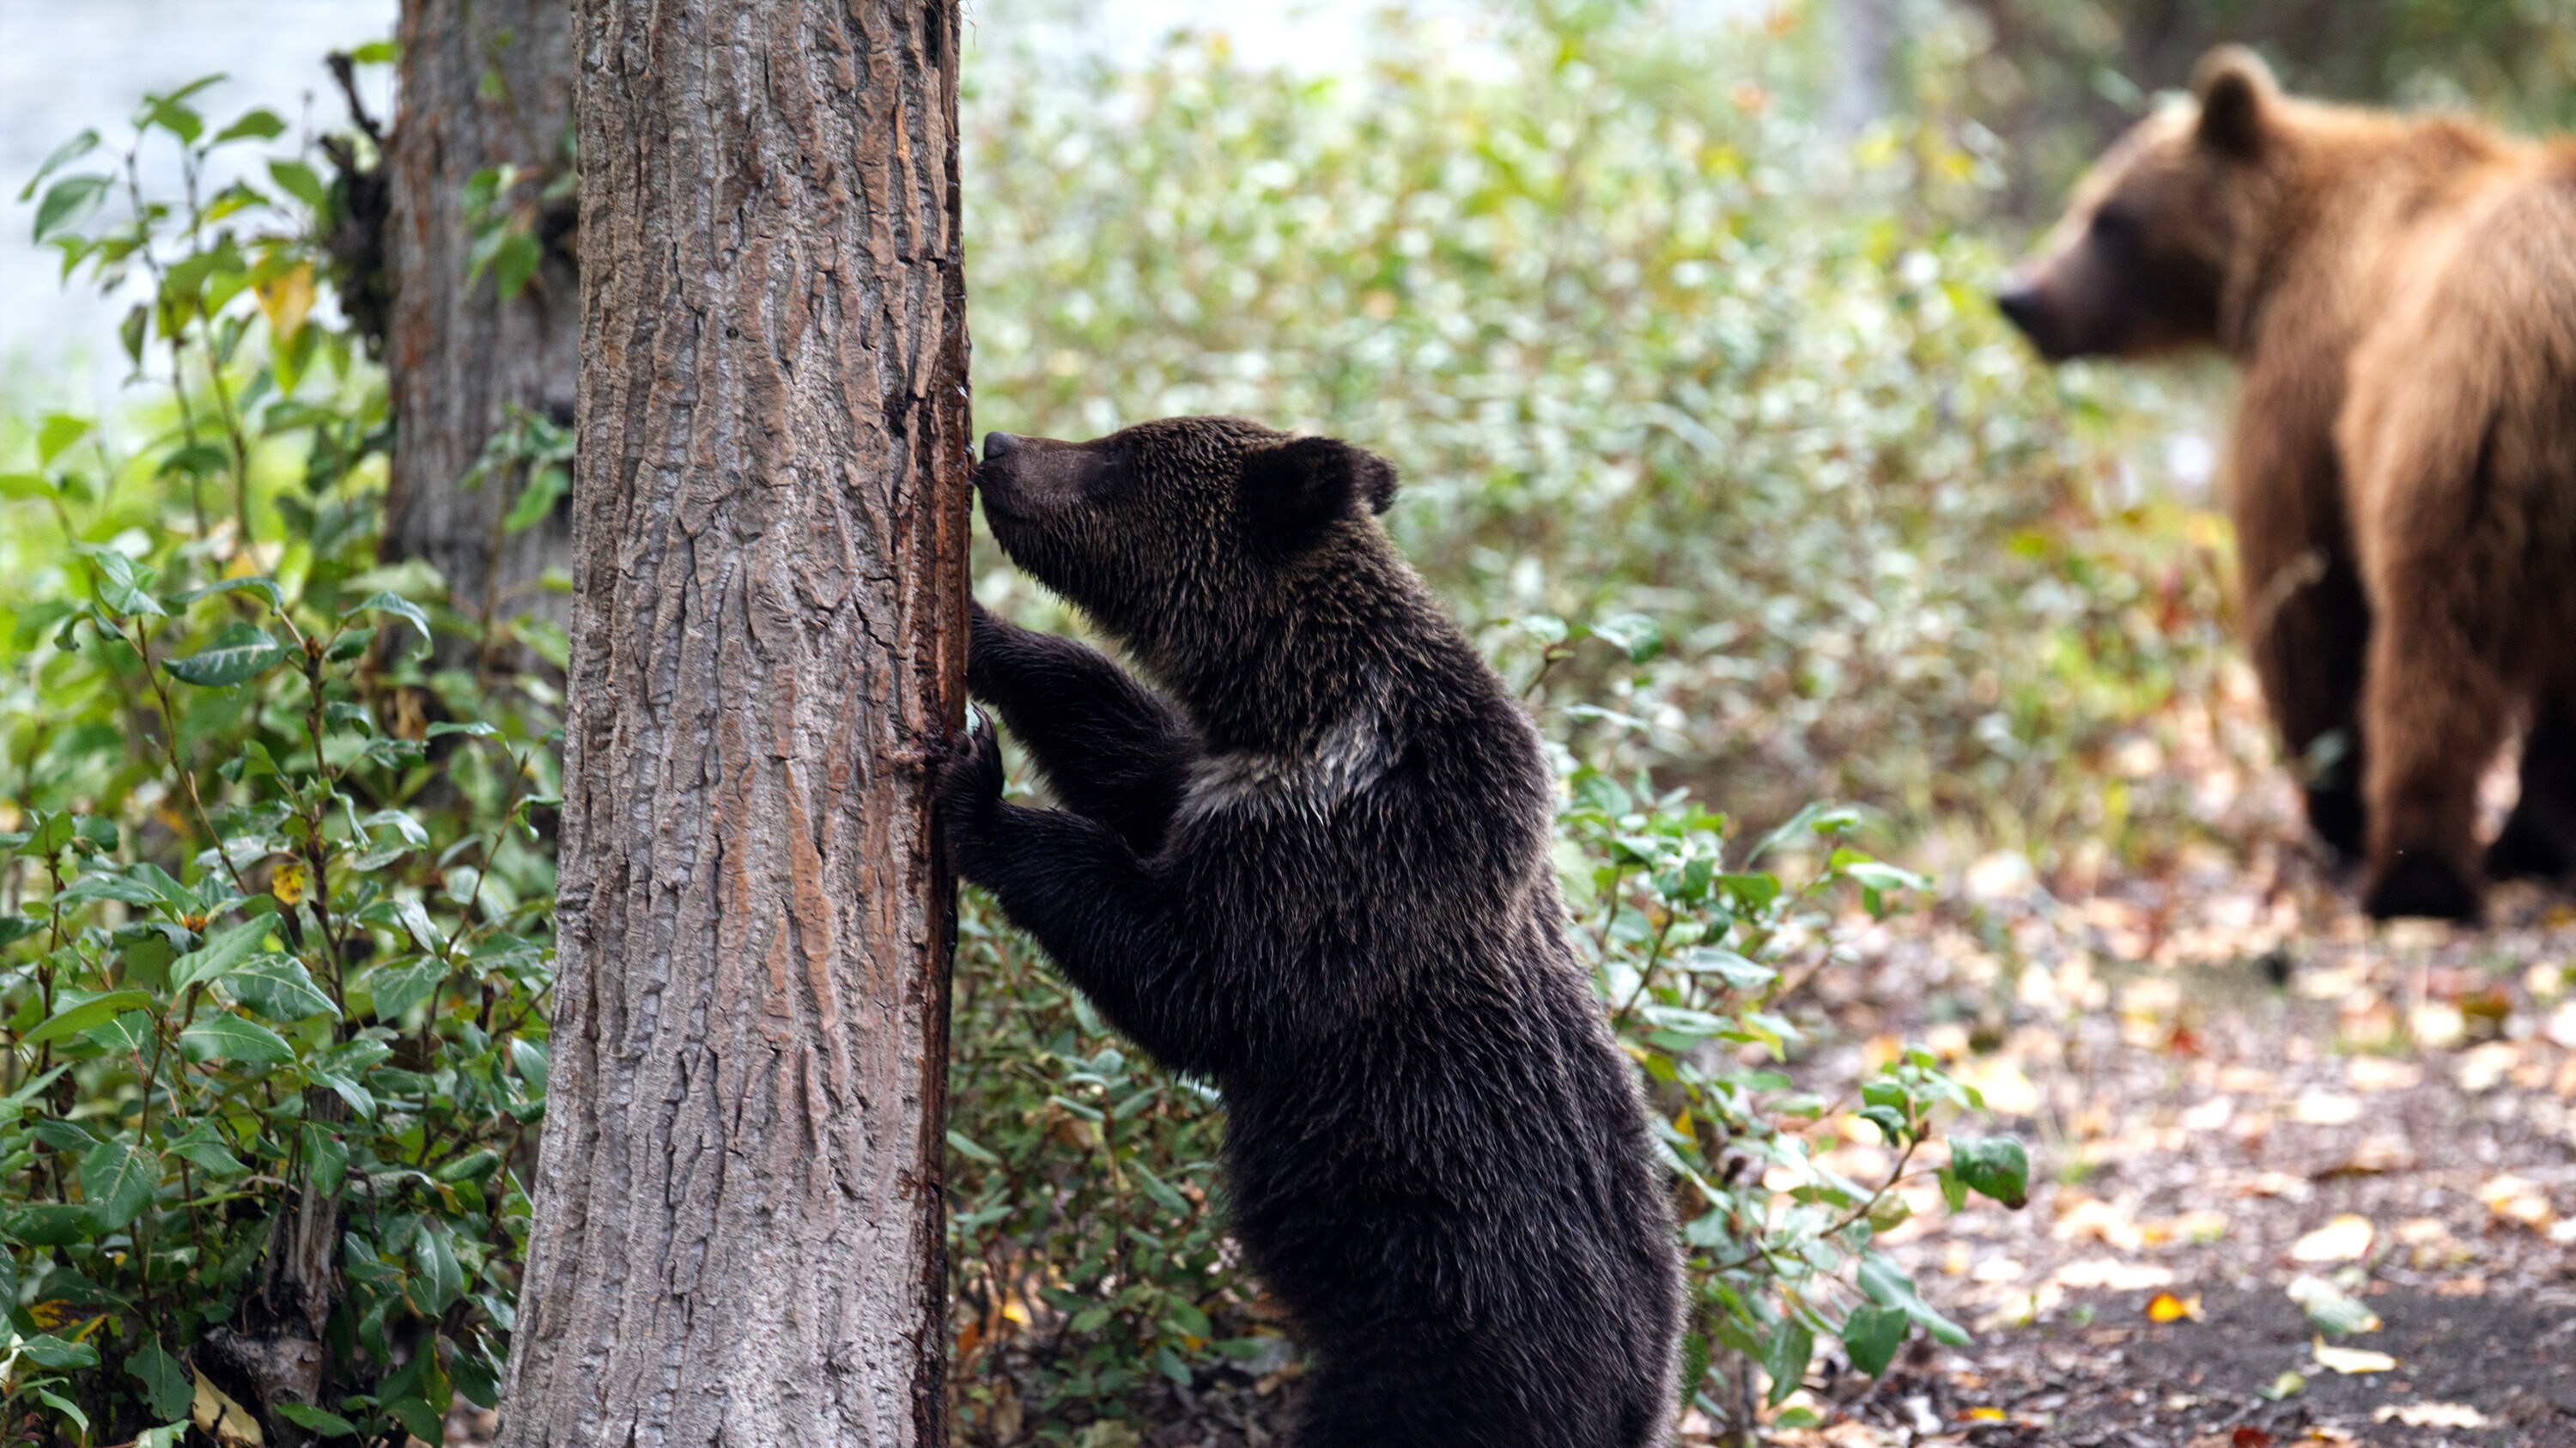 Bear cub standing against a tree and sniffing the bark near the river. (National Geographic for Disney+/Samuel Ellis)